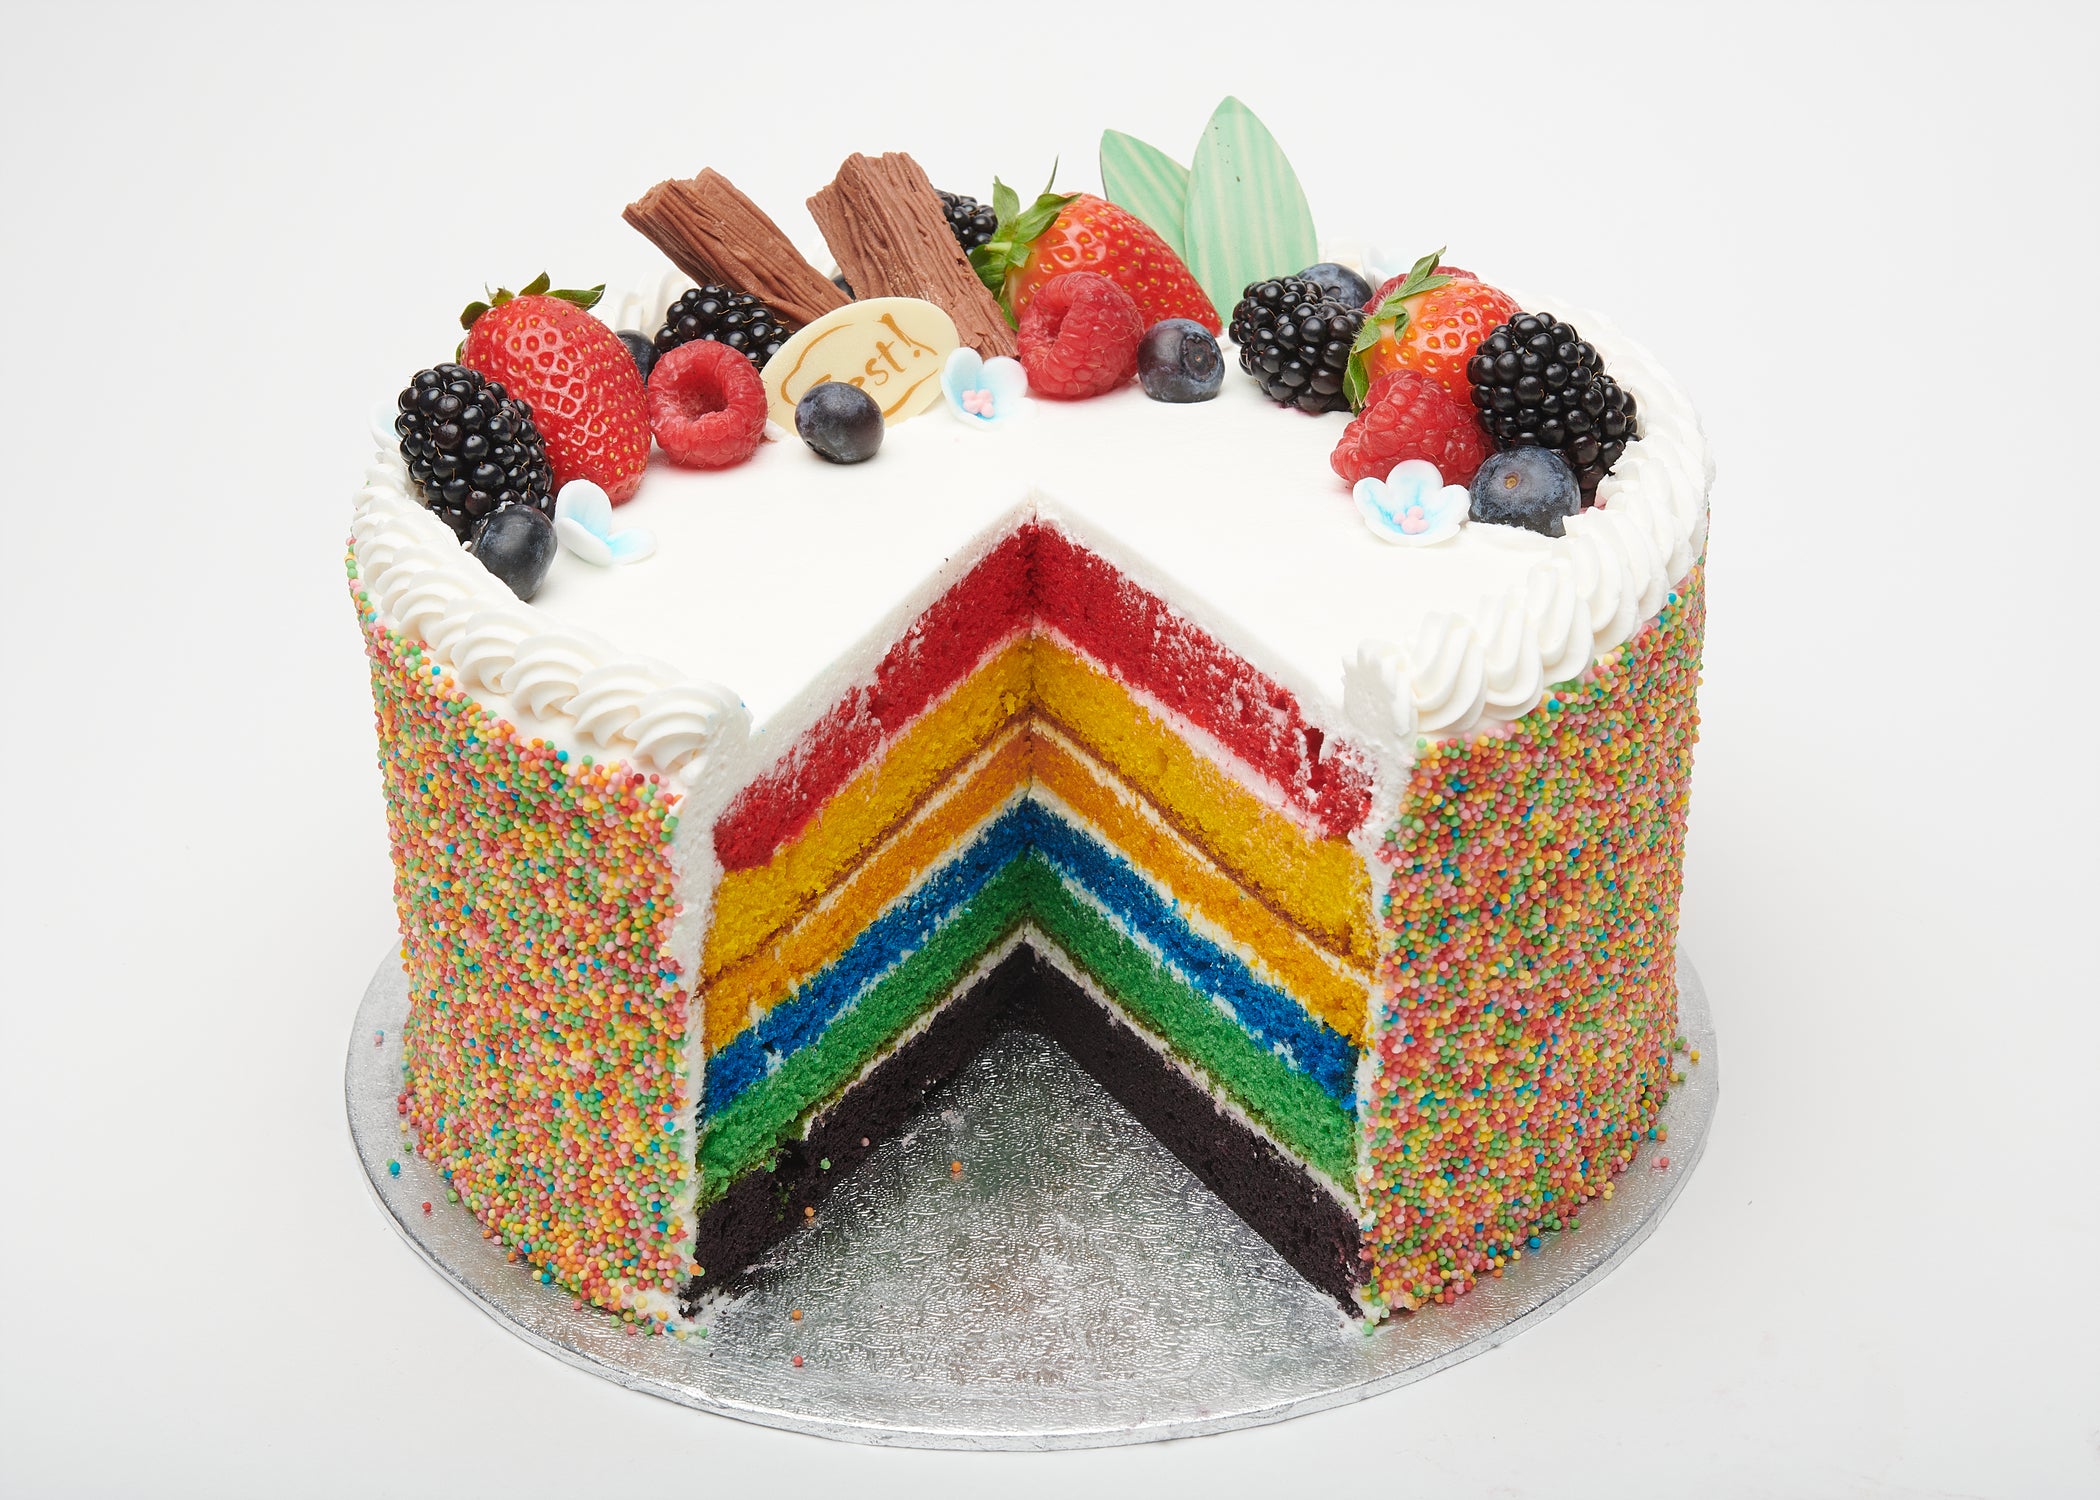 Rainbow Cake Pictures | Download Free Images on Unsplash